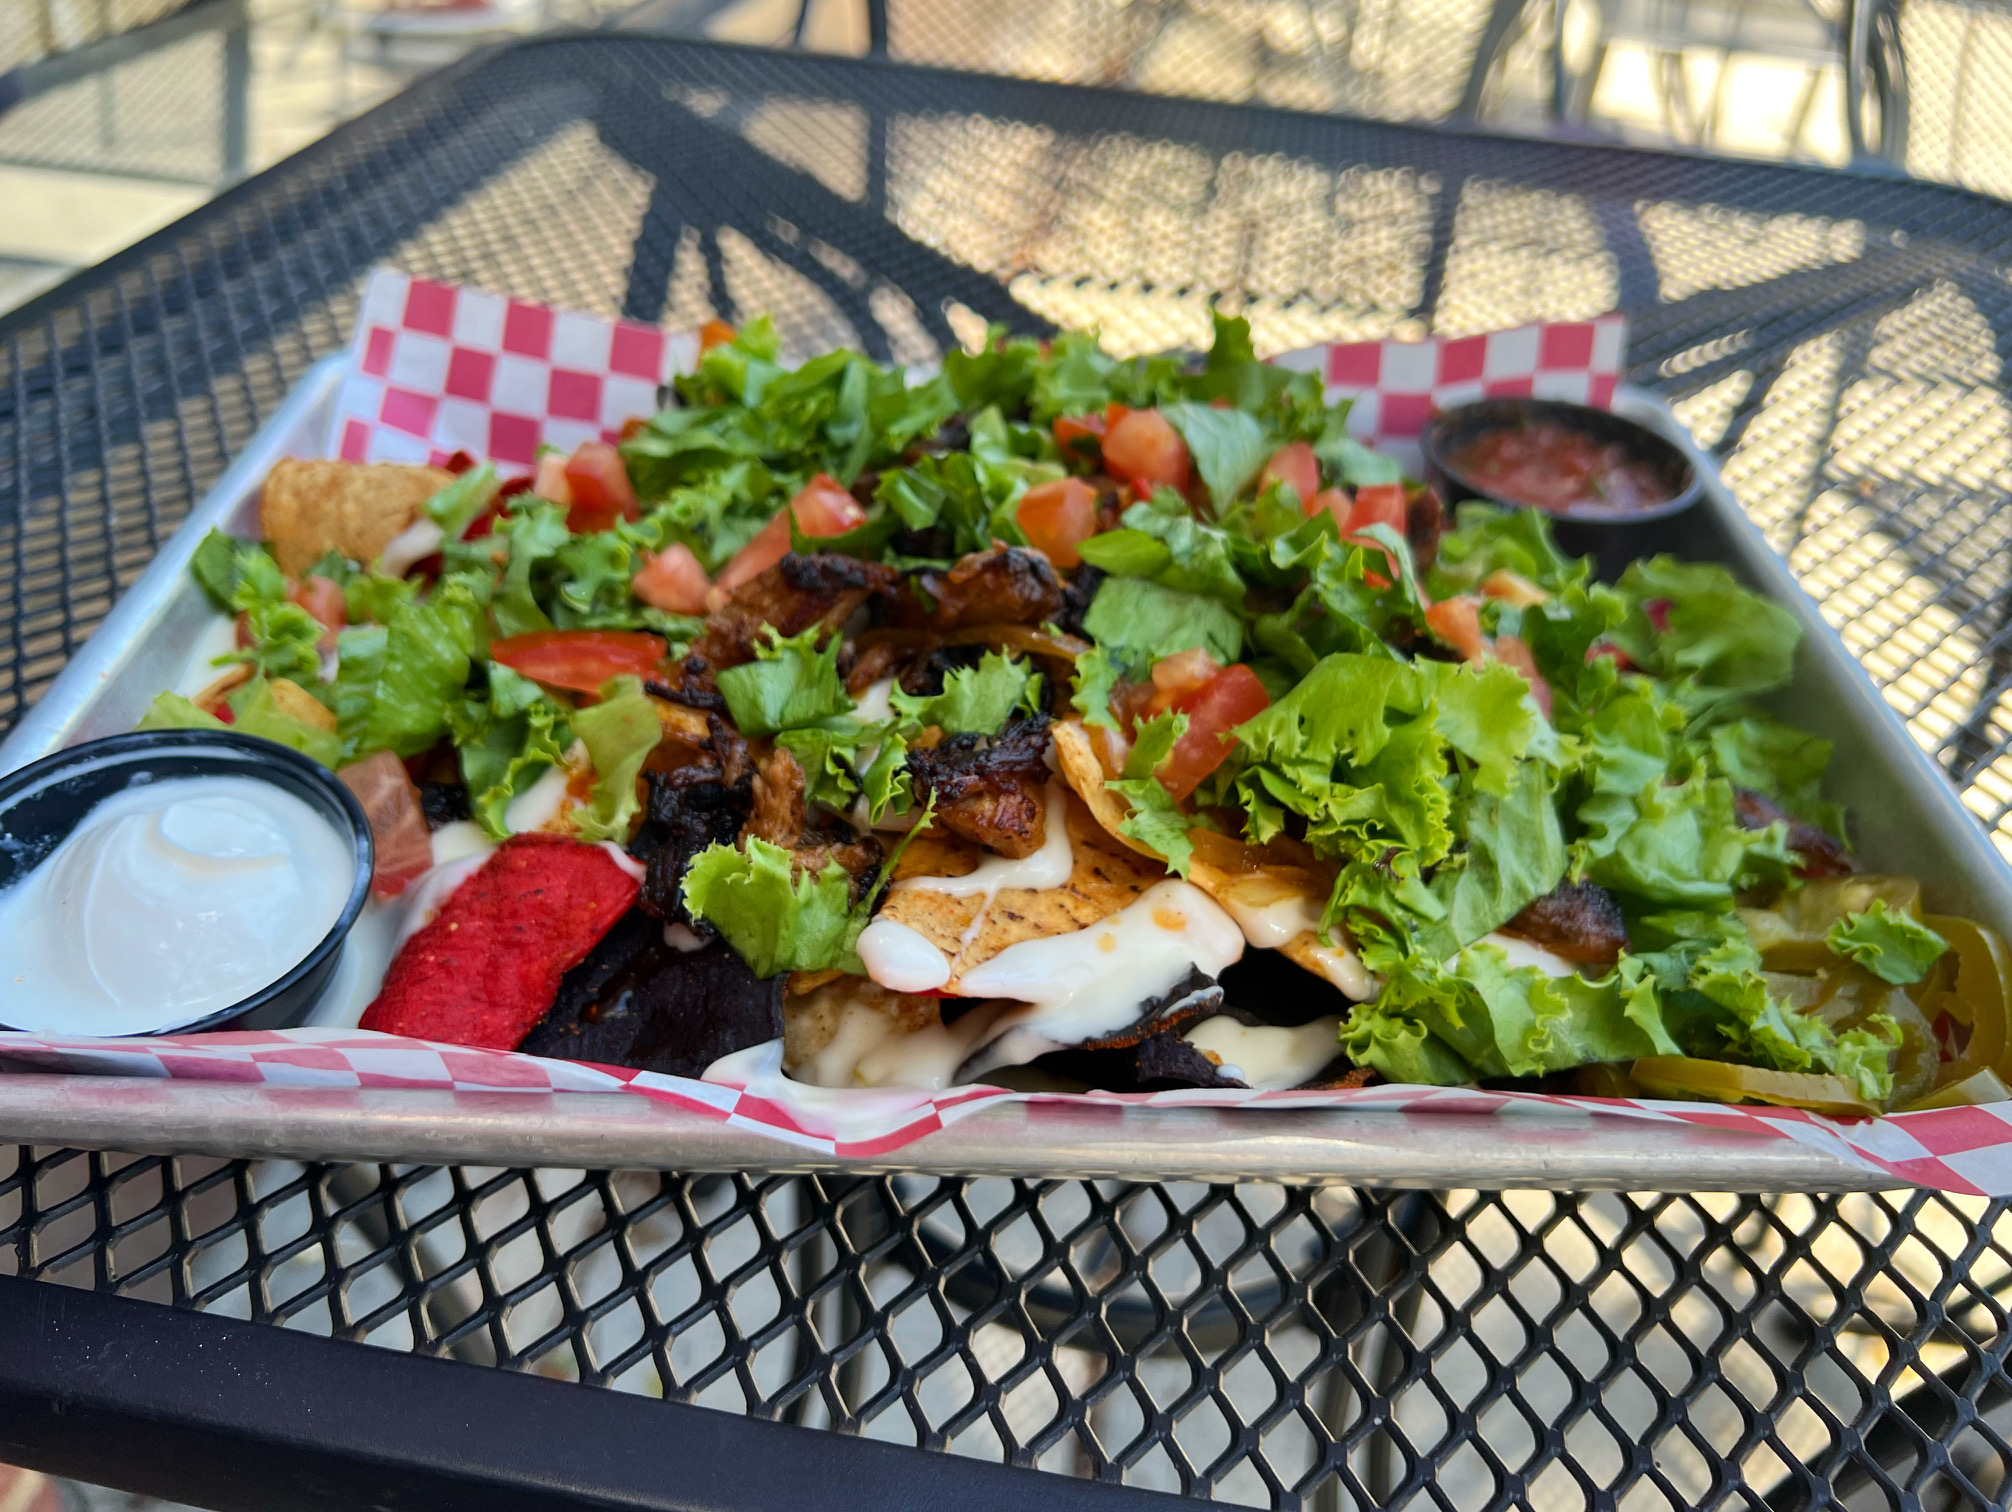 On a black outdoor table, there is a tray of nachos with tricolor chips topped with lots of romaine. Photo by Alyssa Buckley.